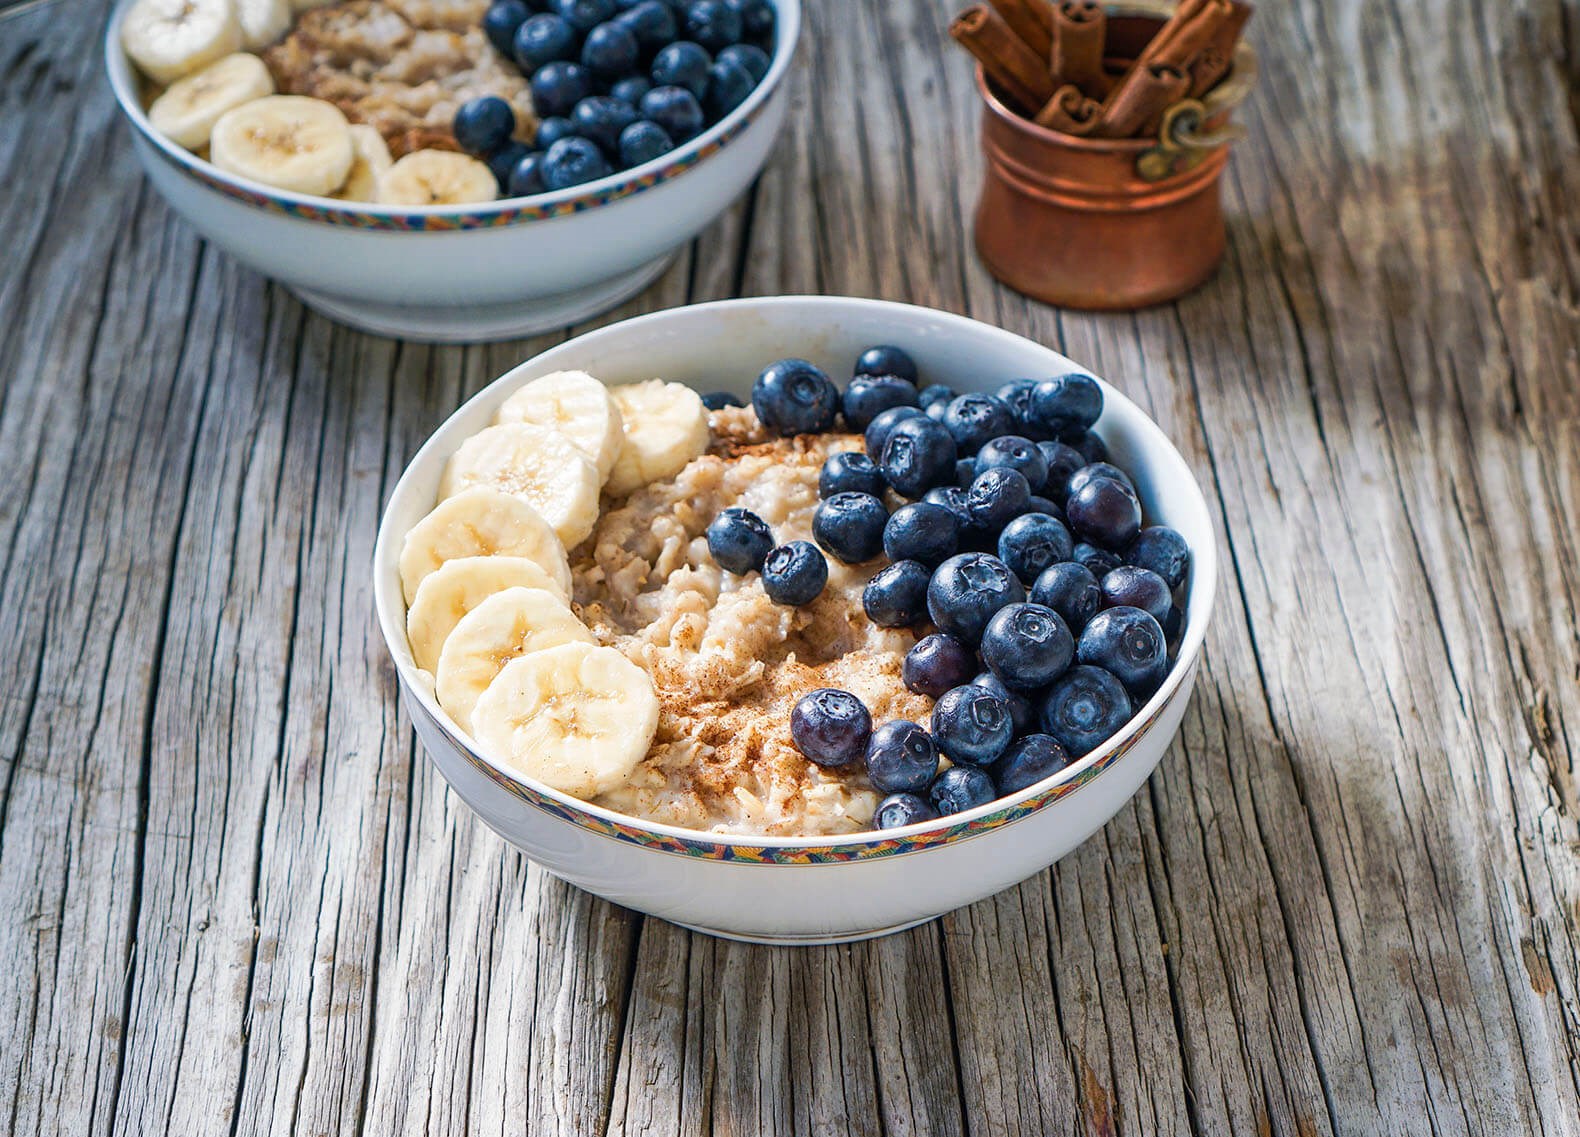 Creamy Oats and Blueberries